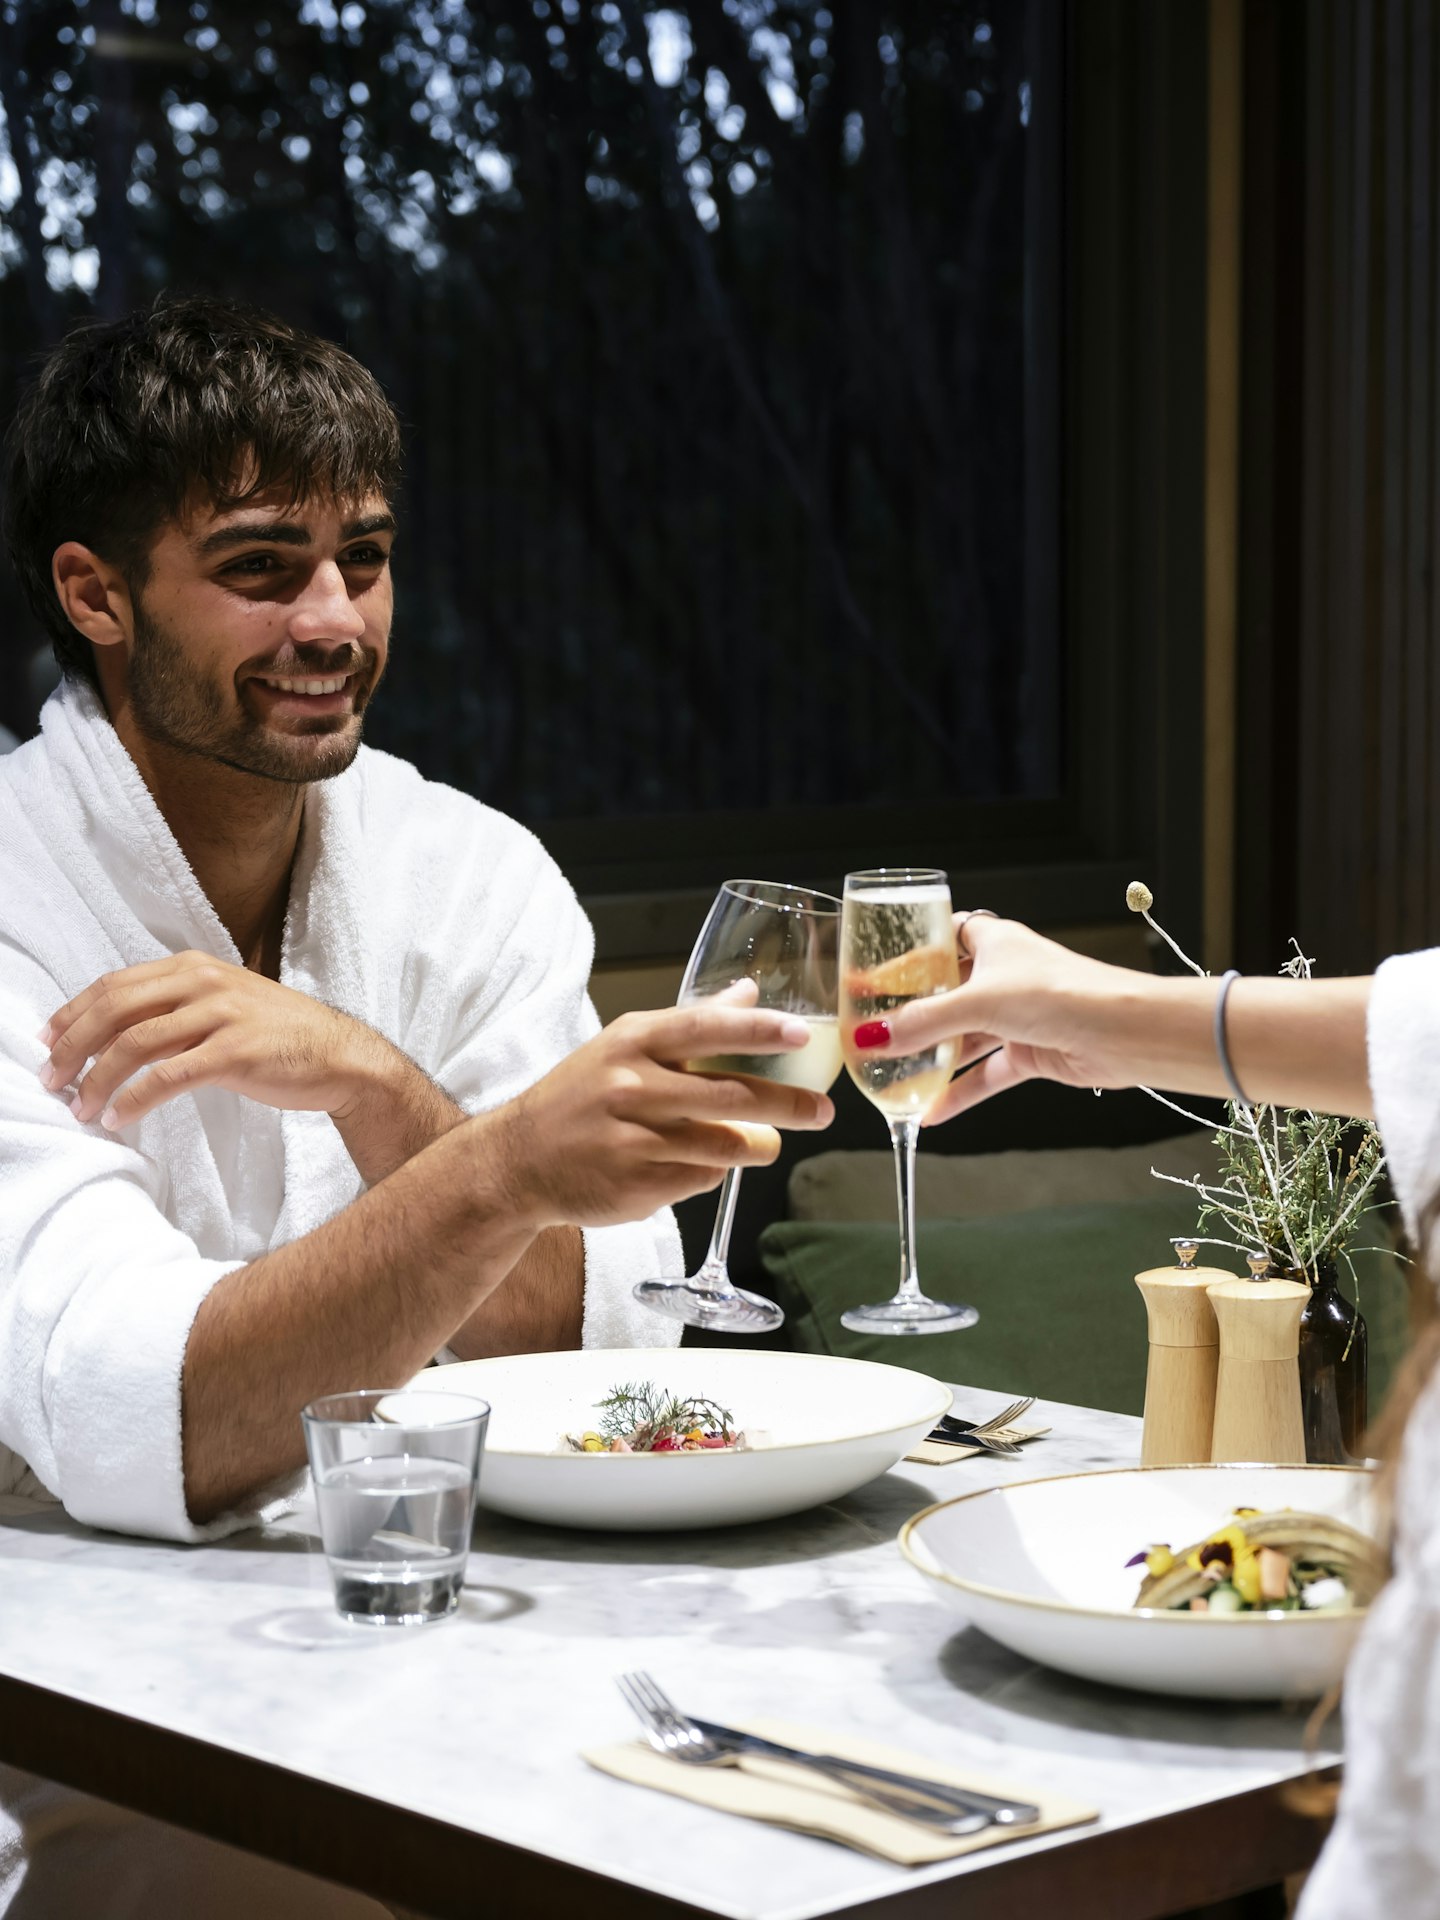 couple in white bath robes sitting at dining table clinking wine glasses